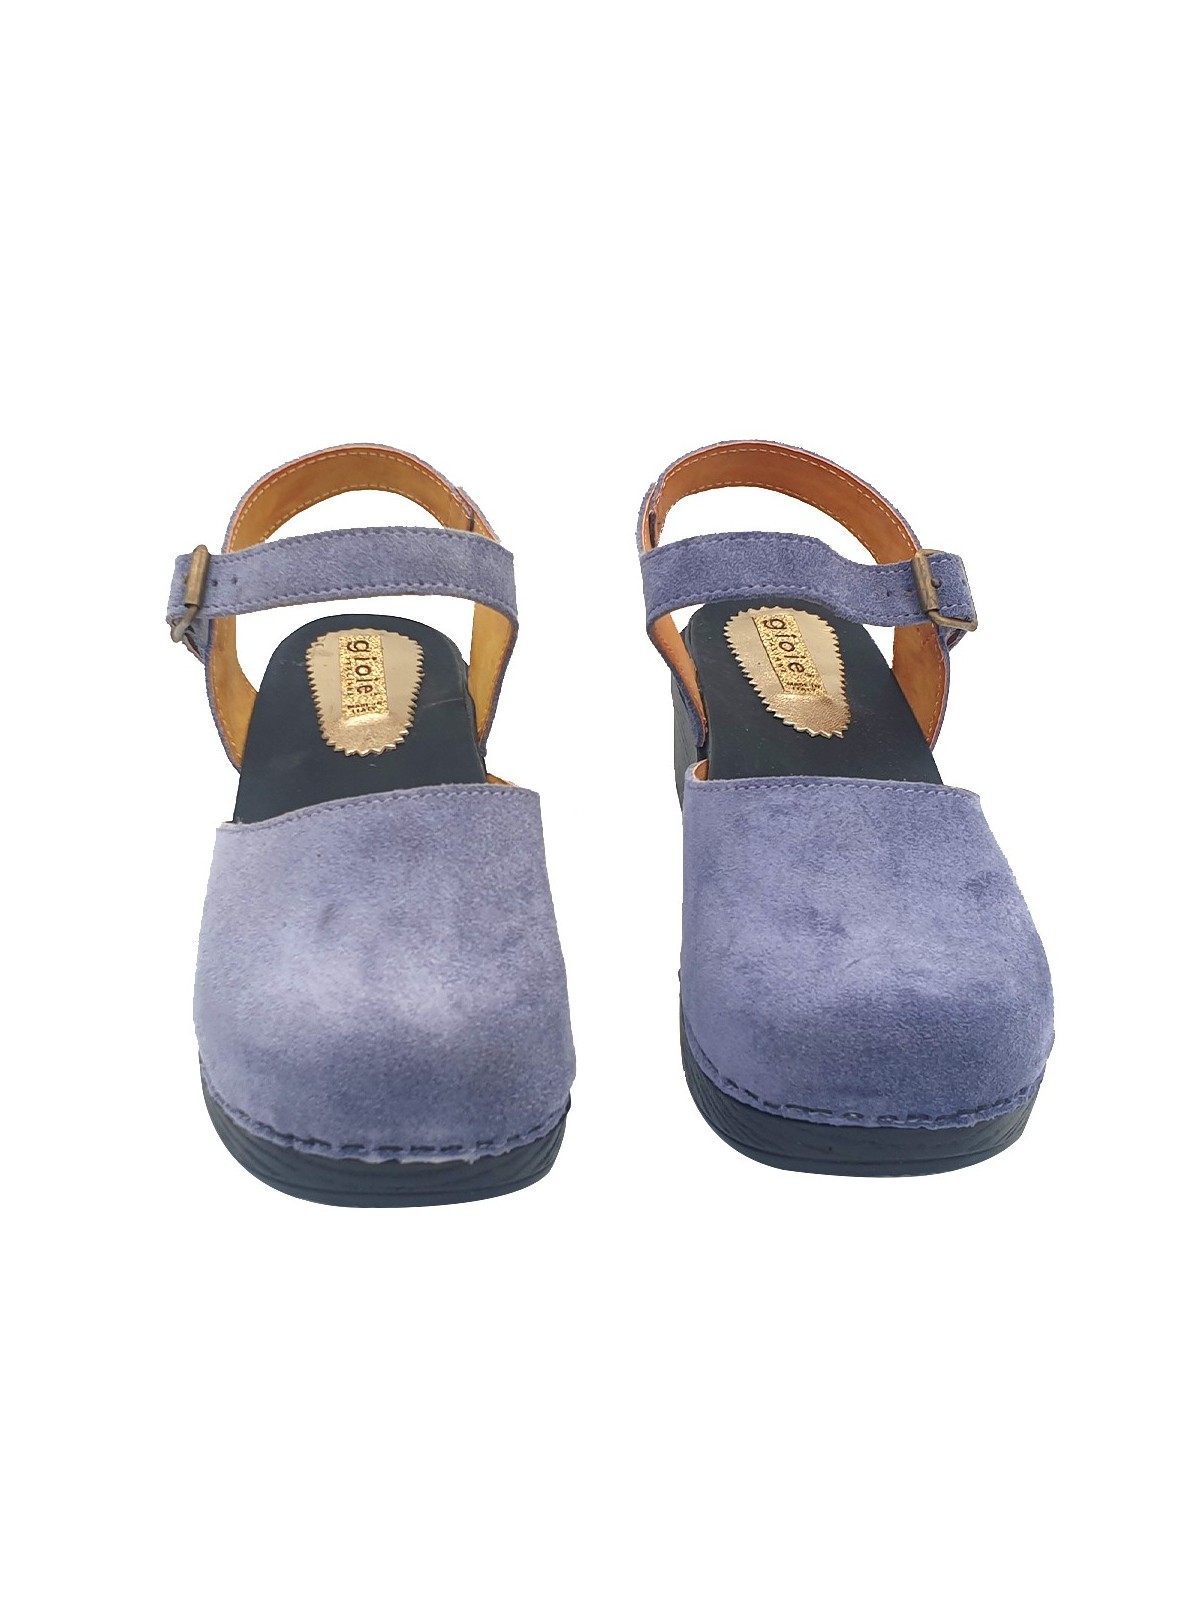 LOW DUTCH CLOGS IN NAVY SUEDE